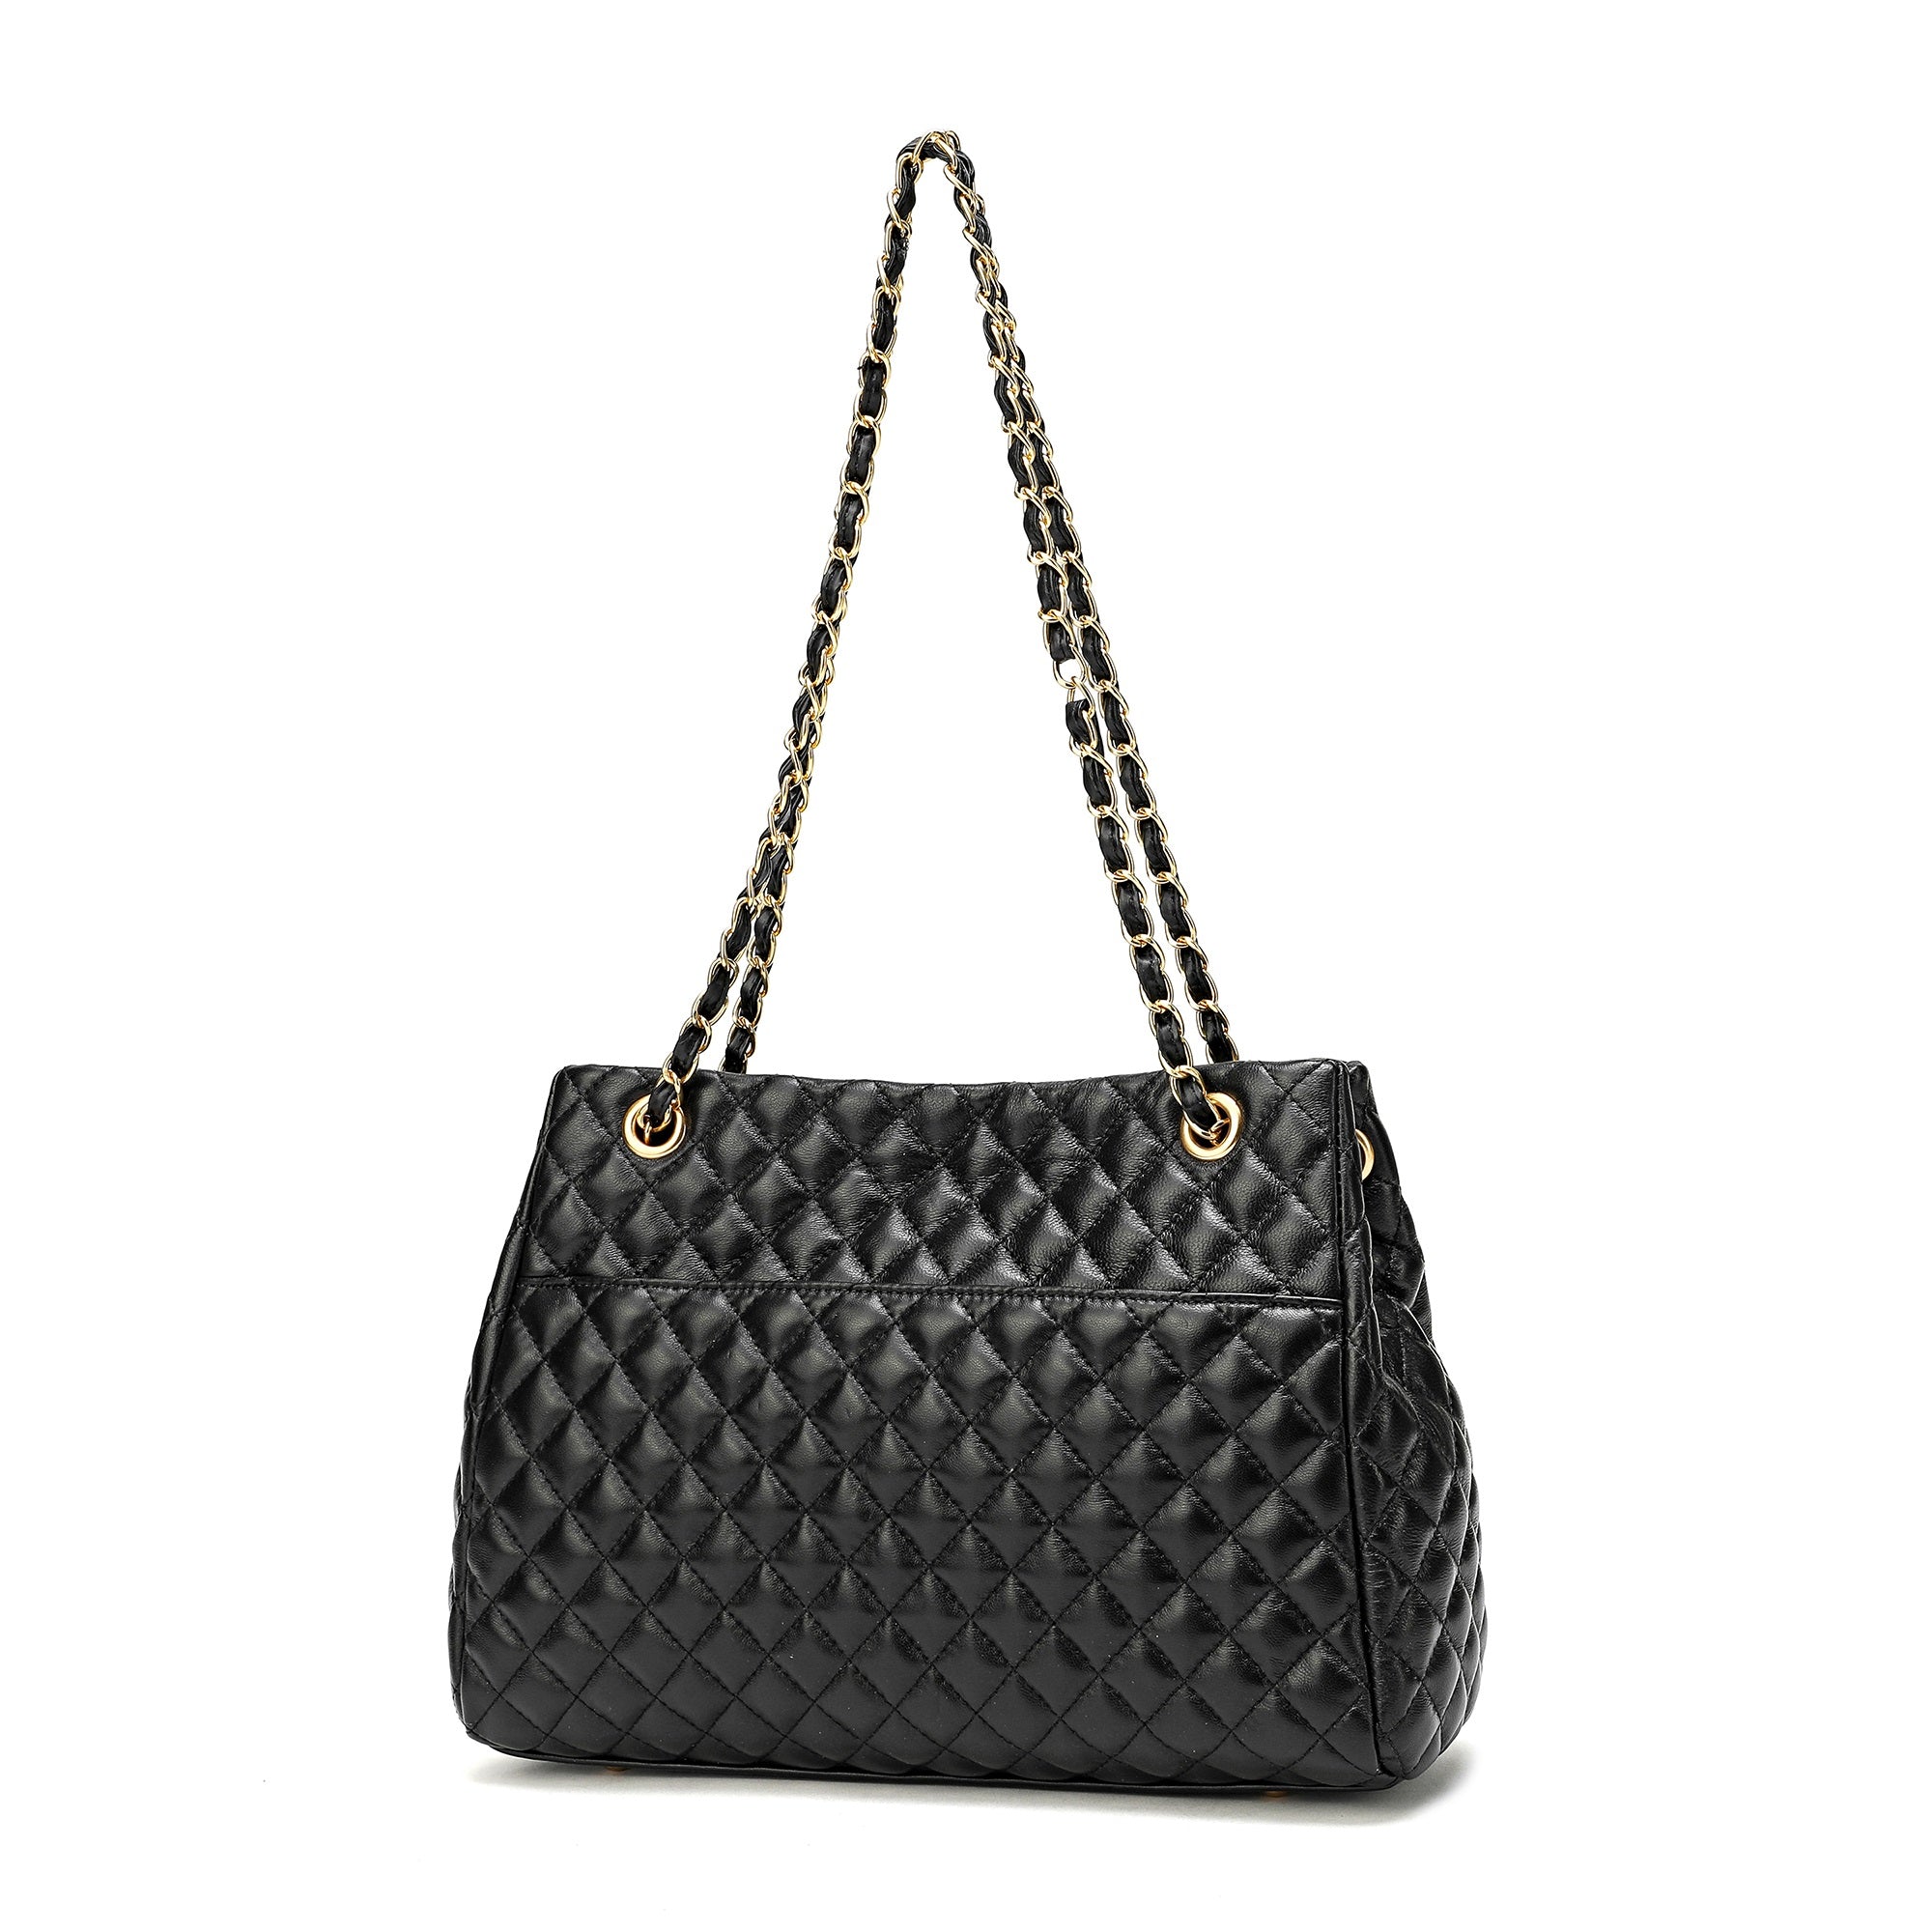 Black Leather Quilted Flap Crossbody Bag for Women - Perfect for Everyday  Use, Best Cross body Purse Designer Shoulder Bag with Tassel: Handbags:  Amazon.com